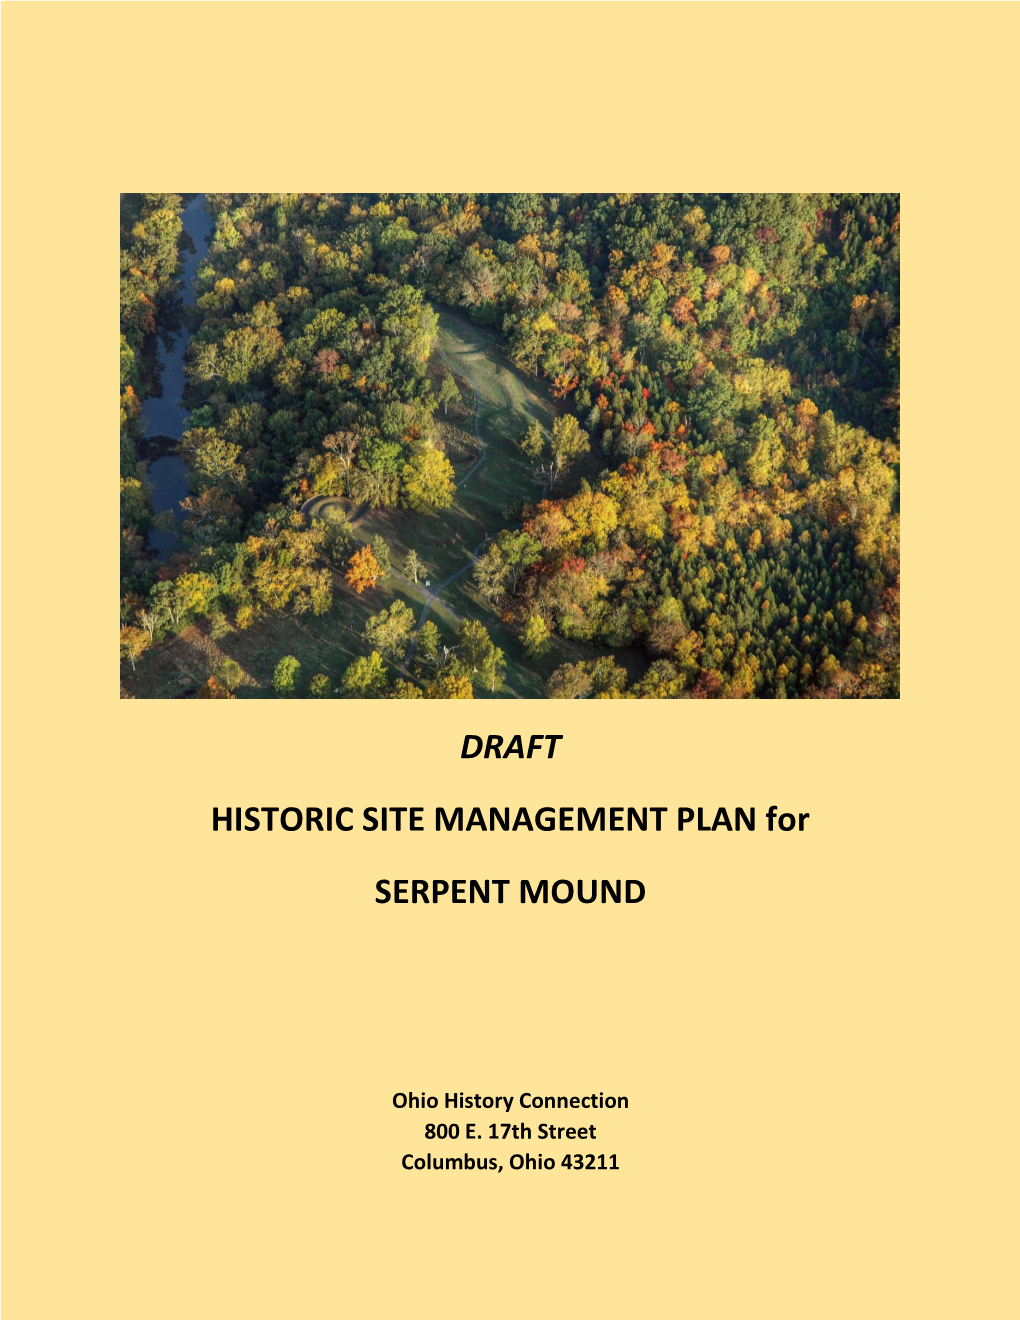 DRAFT HISTORIC SITE MANAGEMENT PLAN For